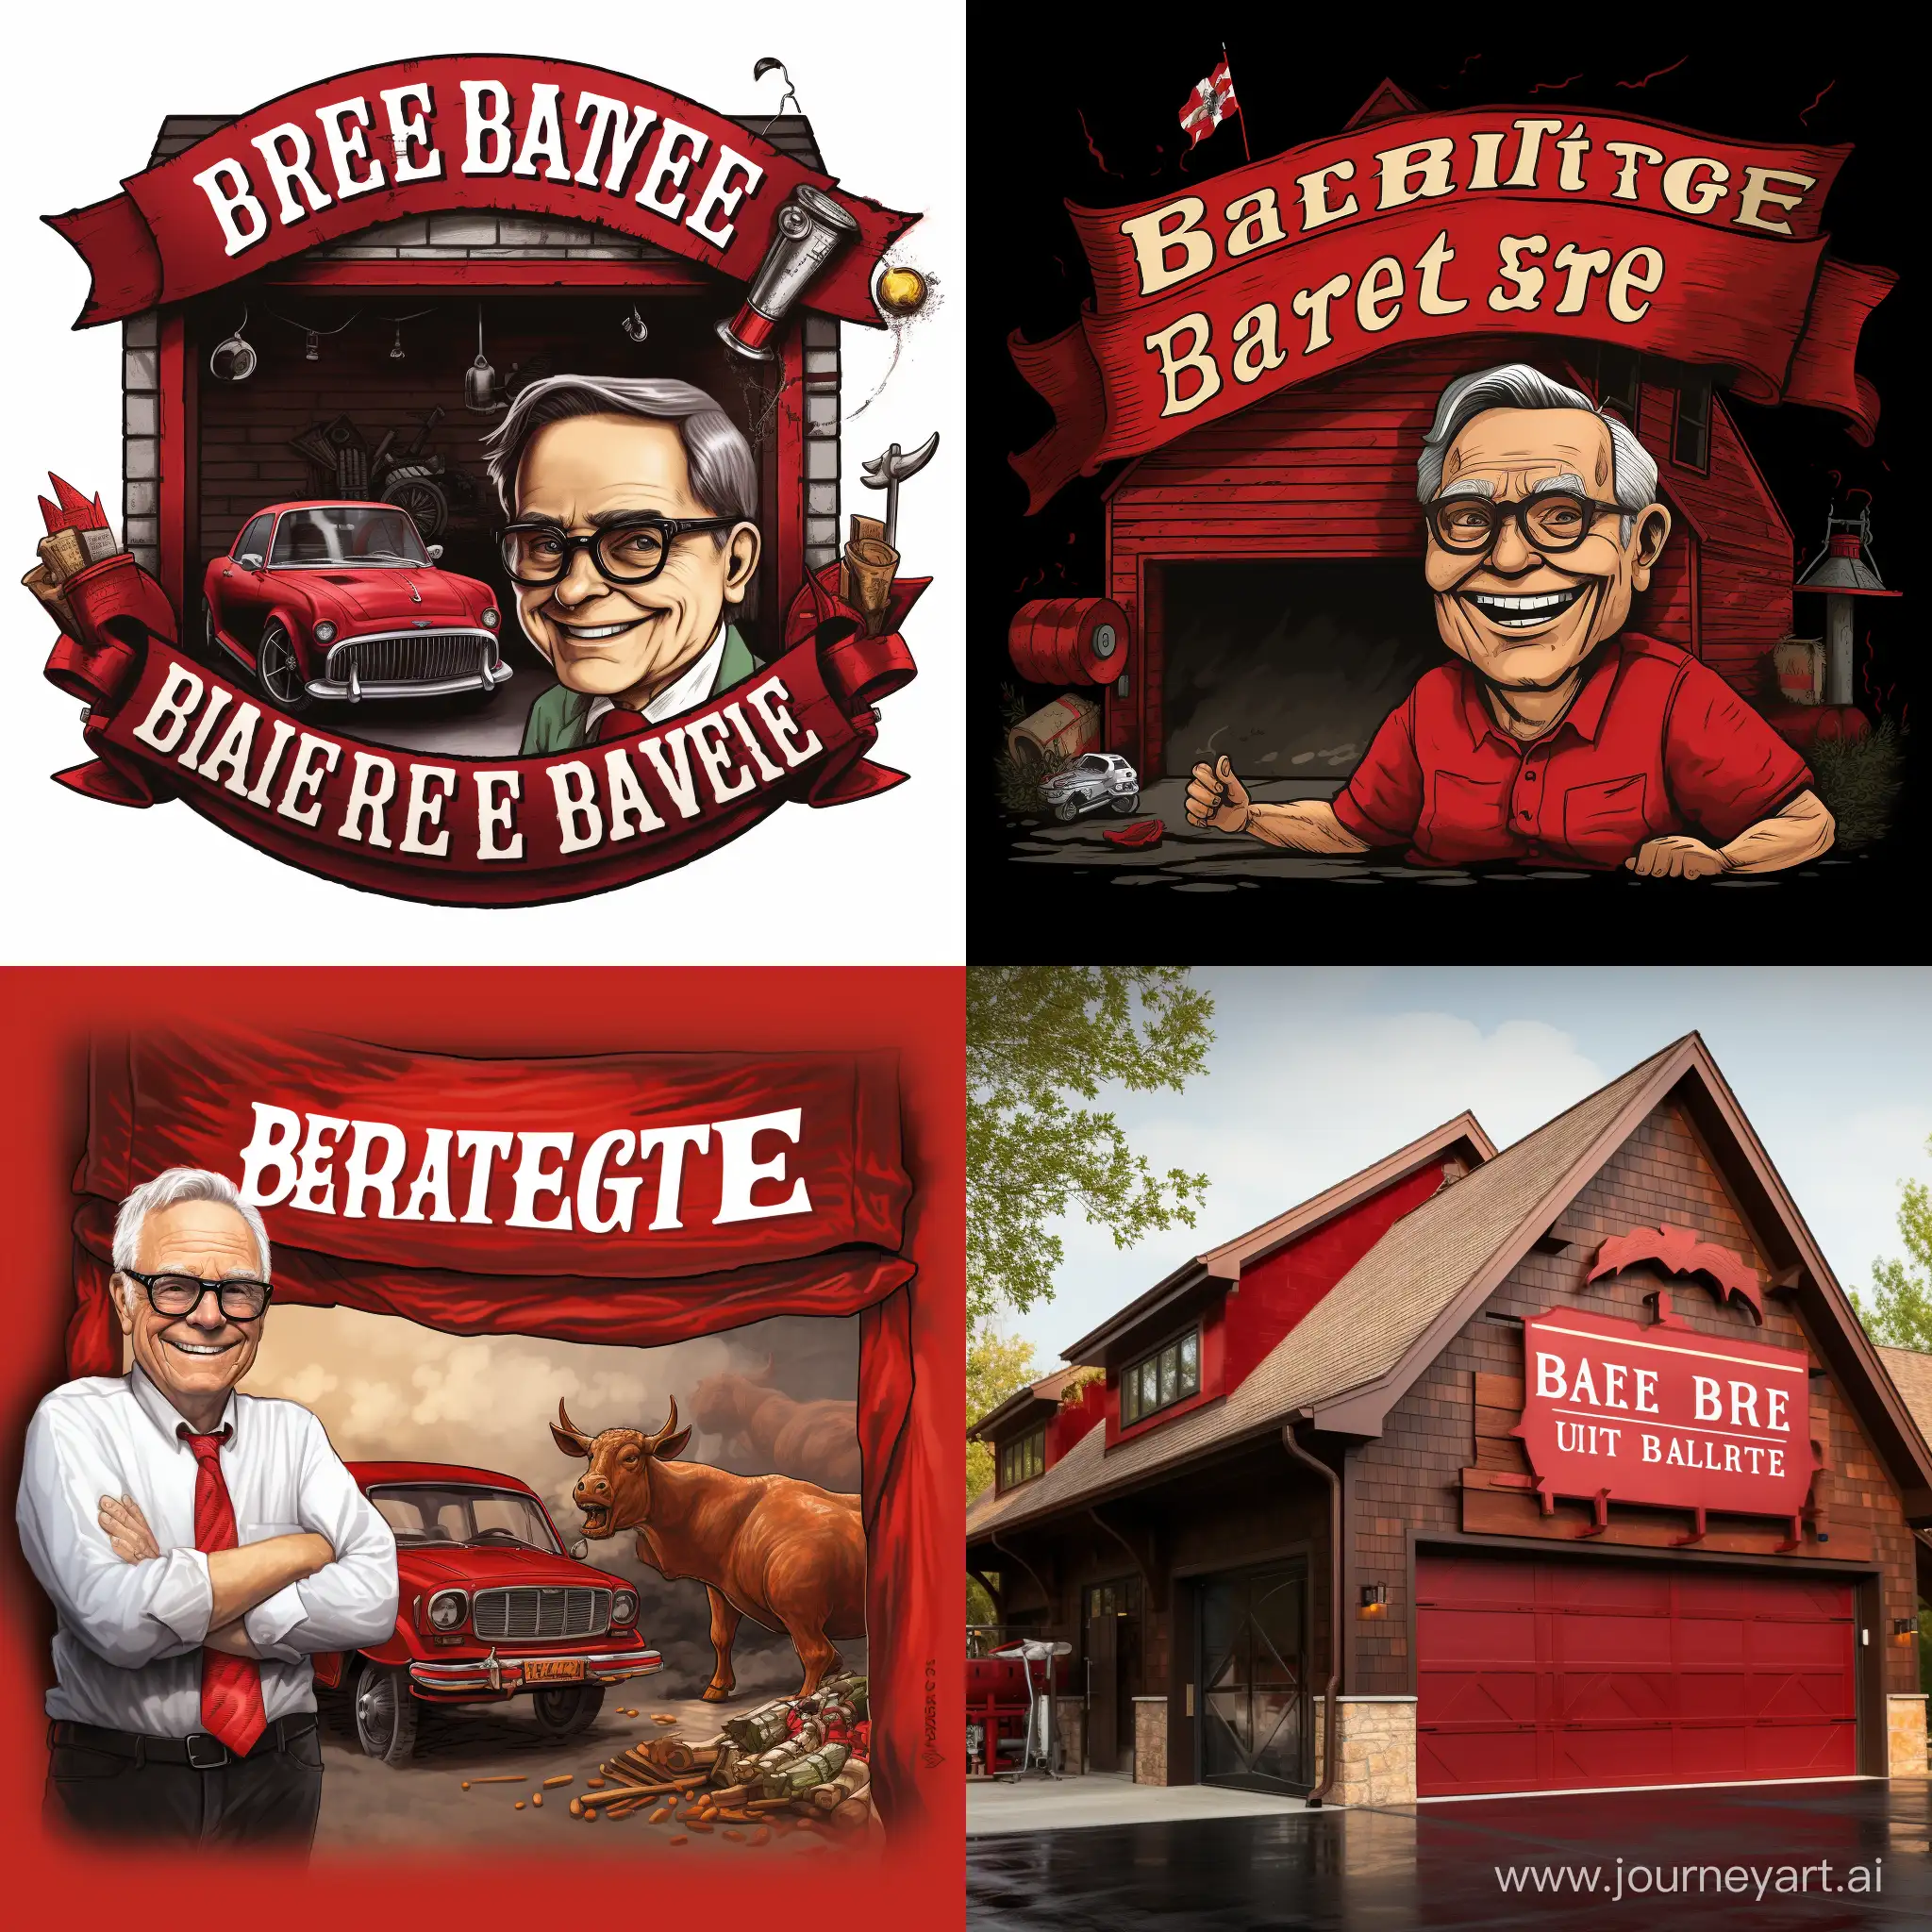 Make me a Banner for a youtube channel on investing and finance, called Buffett's Garage in red colors